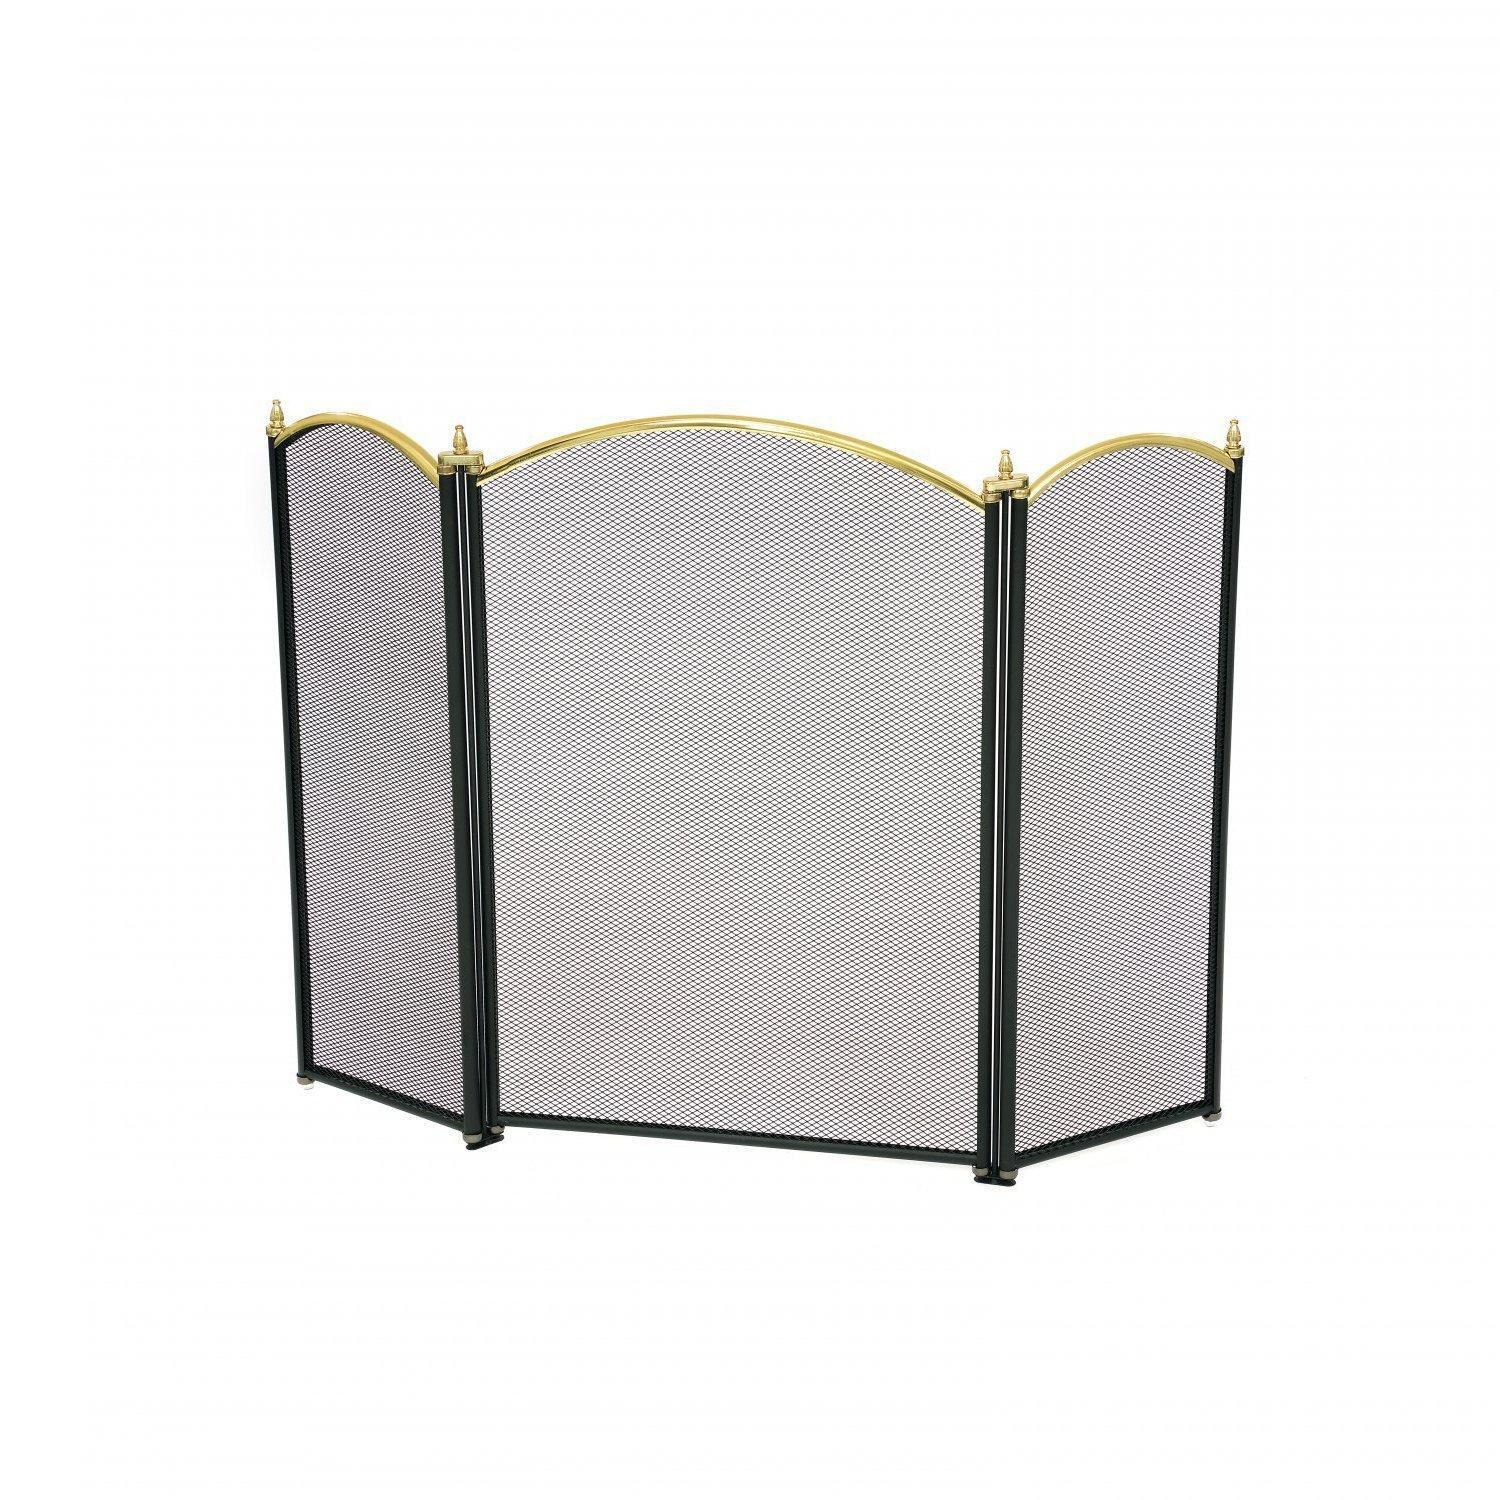 3 Panel Fire Screen Spark Guard - image 1